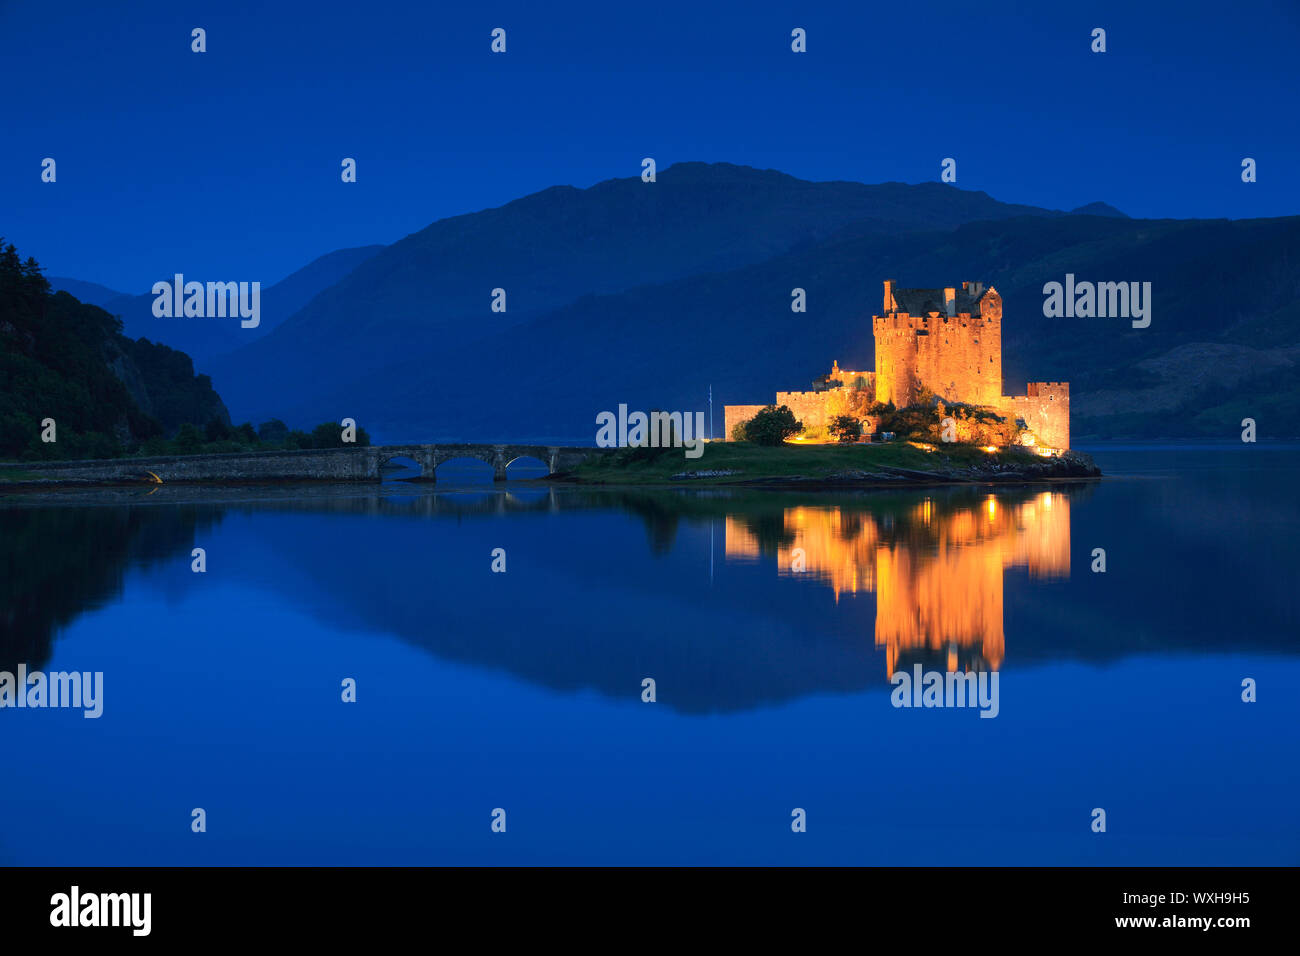 Eilean Donan Castle in the evening. The castle is built in a small island where three lochs converge - Loch Alsh, Loch Long, and Loch Duich. Highlands, Scotland Stock Photo